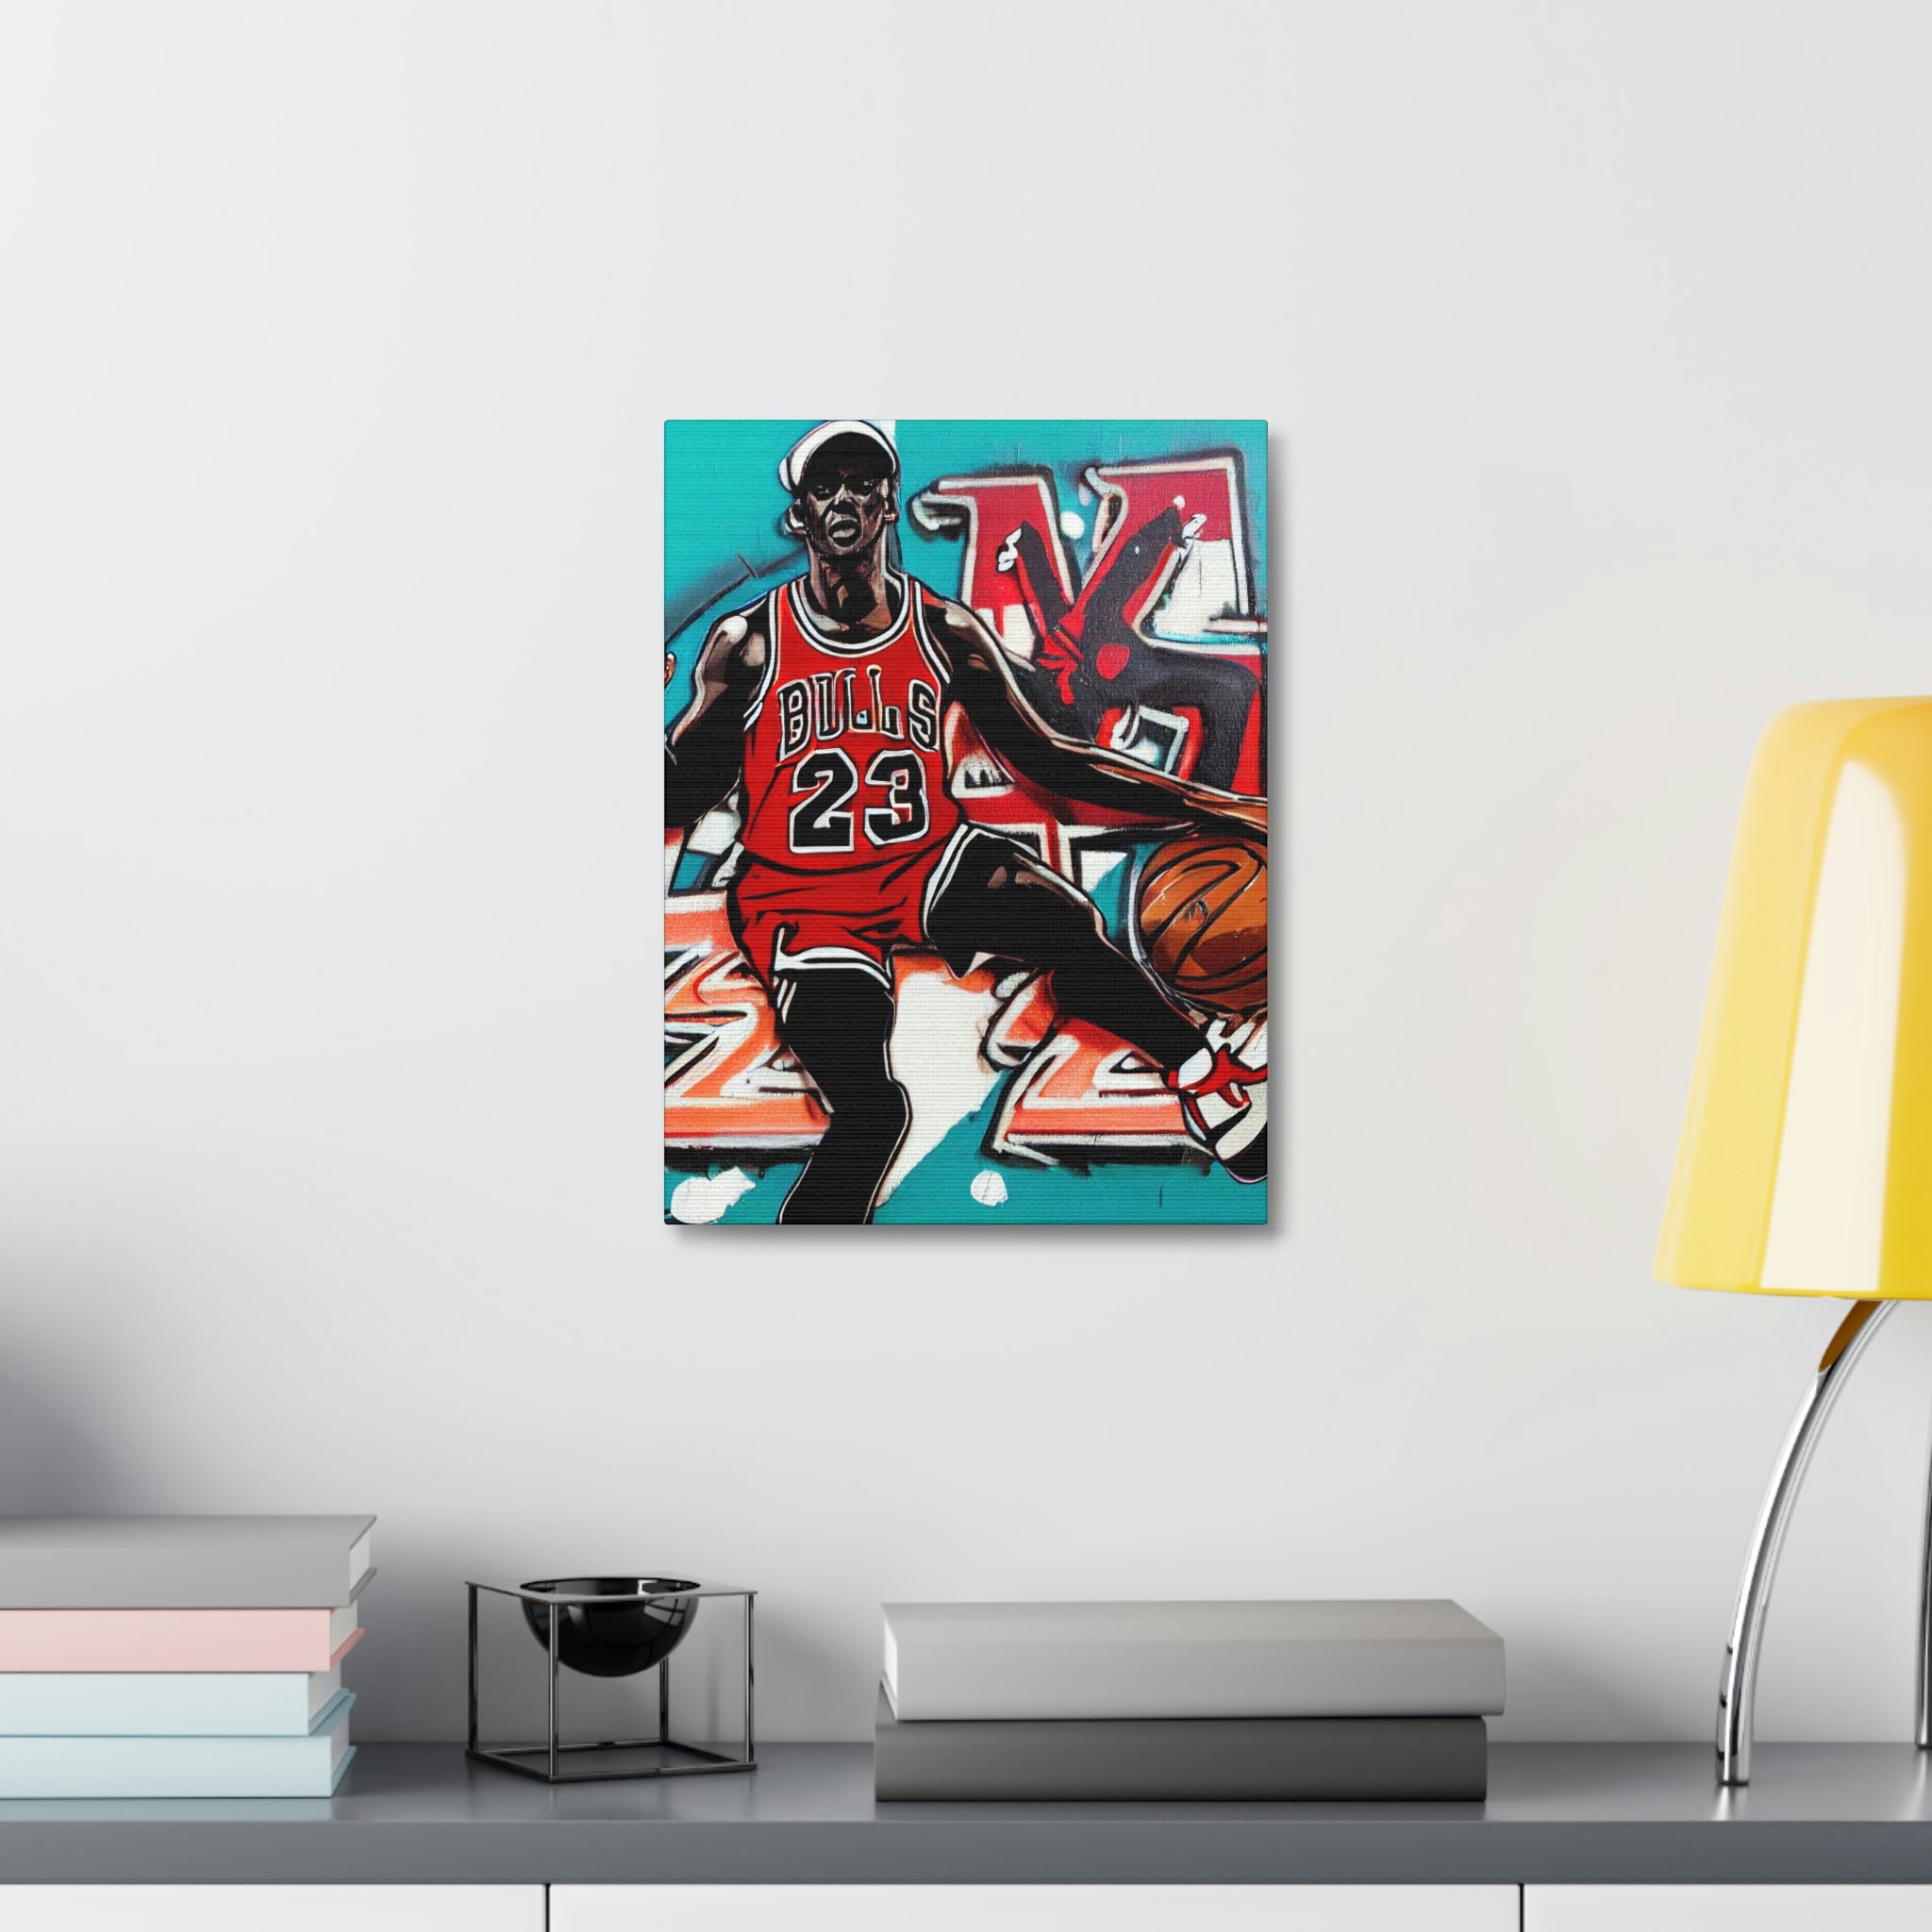 Michael J. Playing Basketball Canvas Pop Art - Wall Art - By Fresh from Jordan Brands Fall Holiday 2022 clothing collection is the